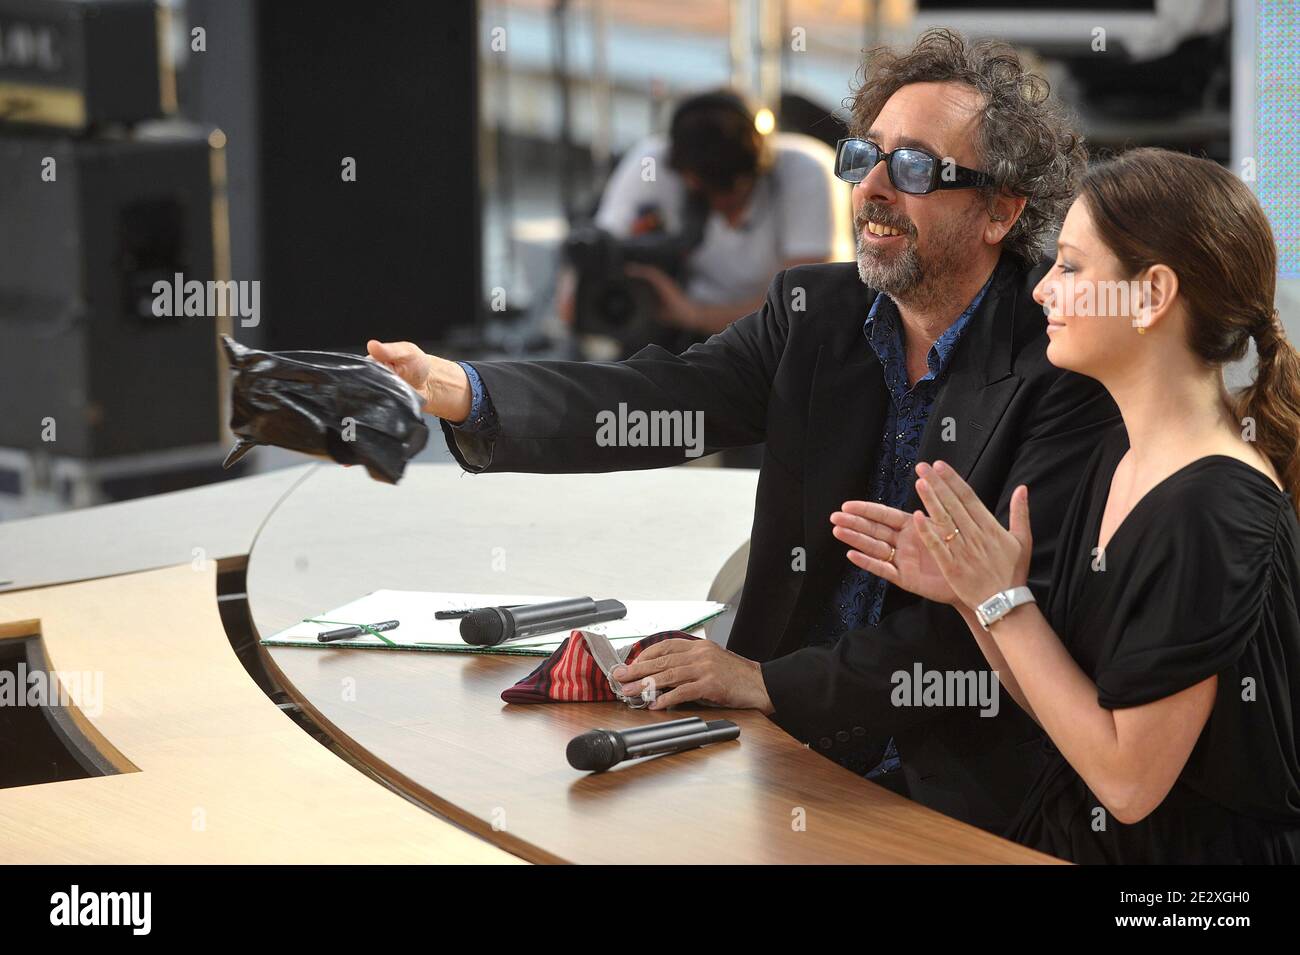 Tim Burton and Giovanna Mezzogiorno during the broadcasting of 'Le Grand  Journal' TV show on Canal Plus channel on the Martinez beach during the  63rd Cannes Film Festival in Cannes, France on